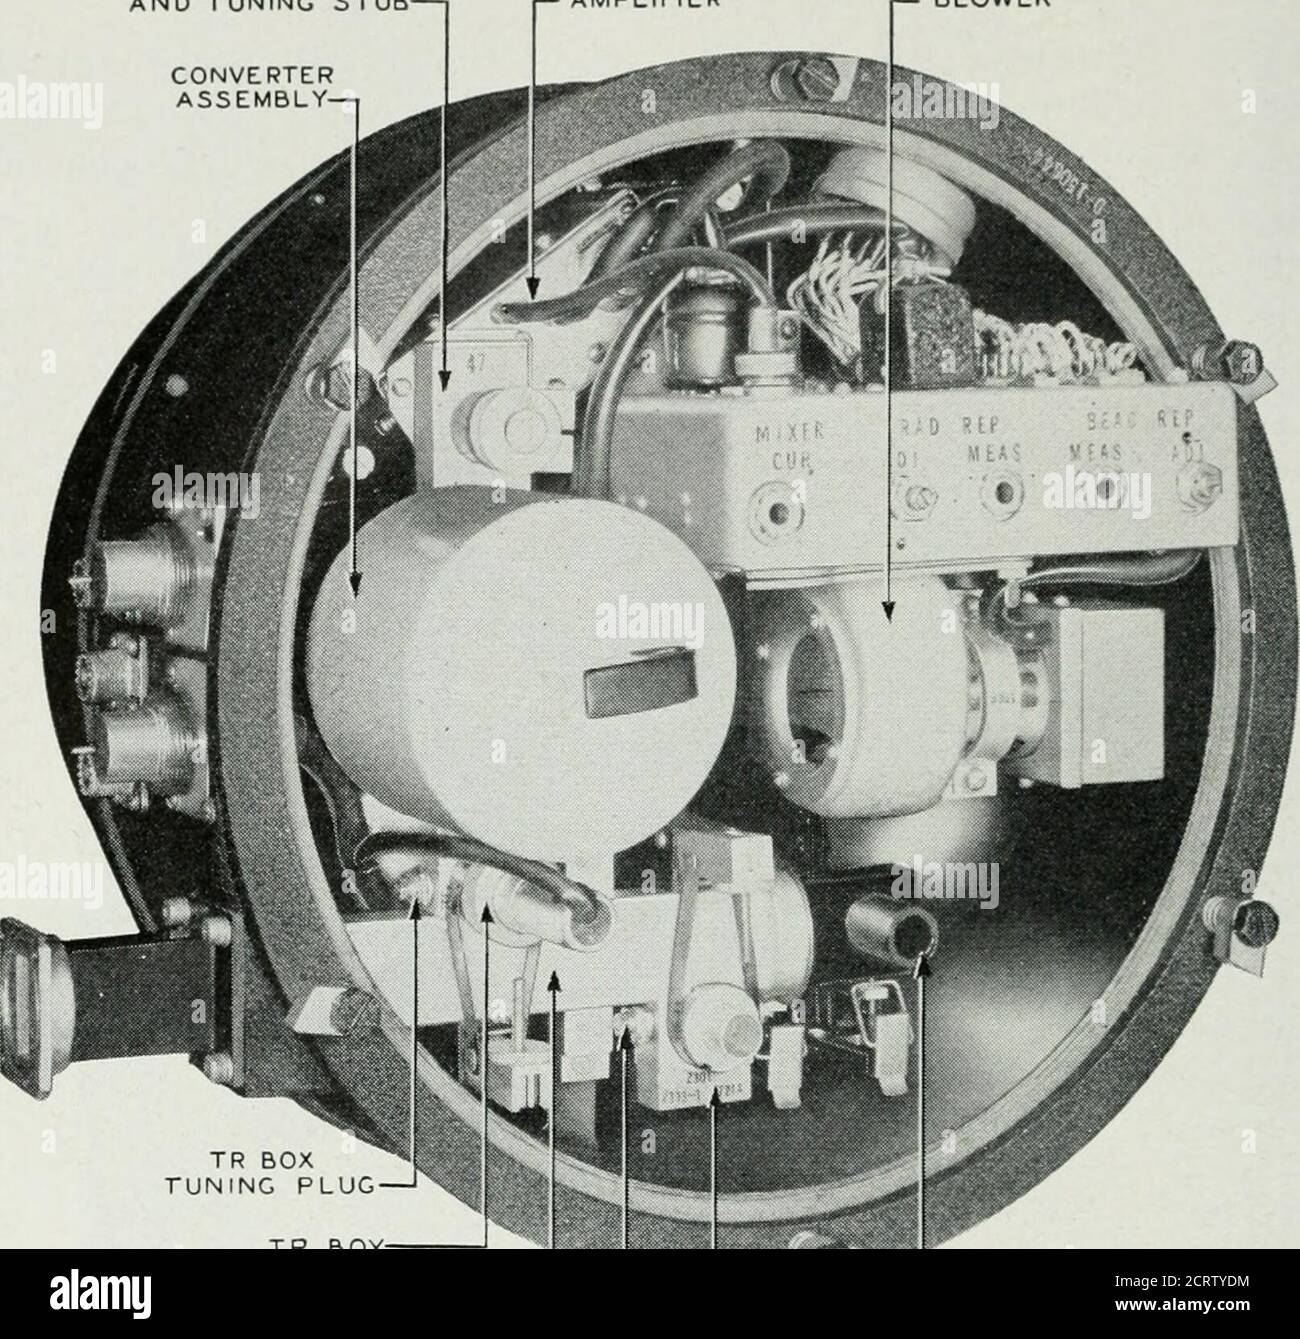 The Bell System technical journal . BEATING OSCILLATORAND PREAMPLIFIER 11—The wave guide system of the SL radar emi)Ioying the 721. tulte Fig. 13 while Fig. 14 is an